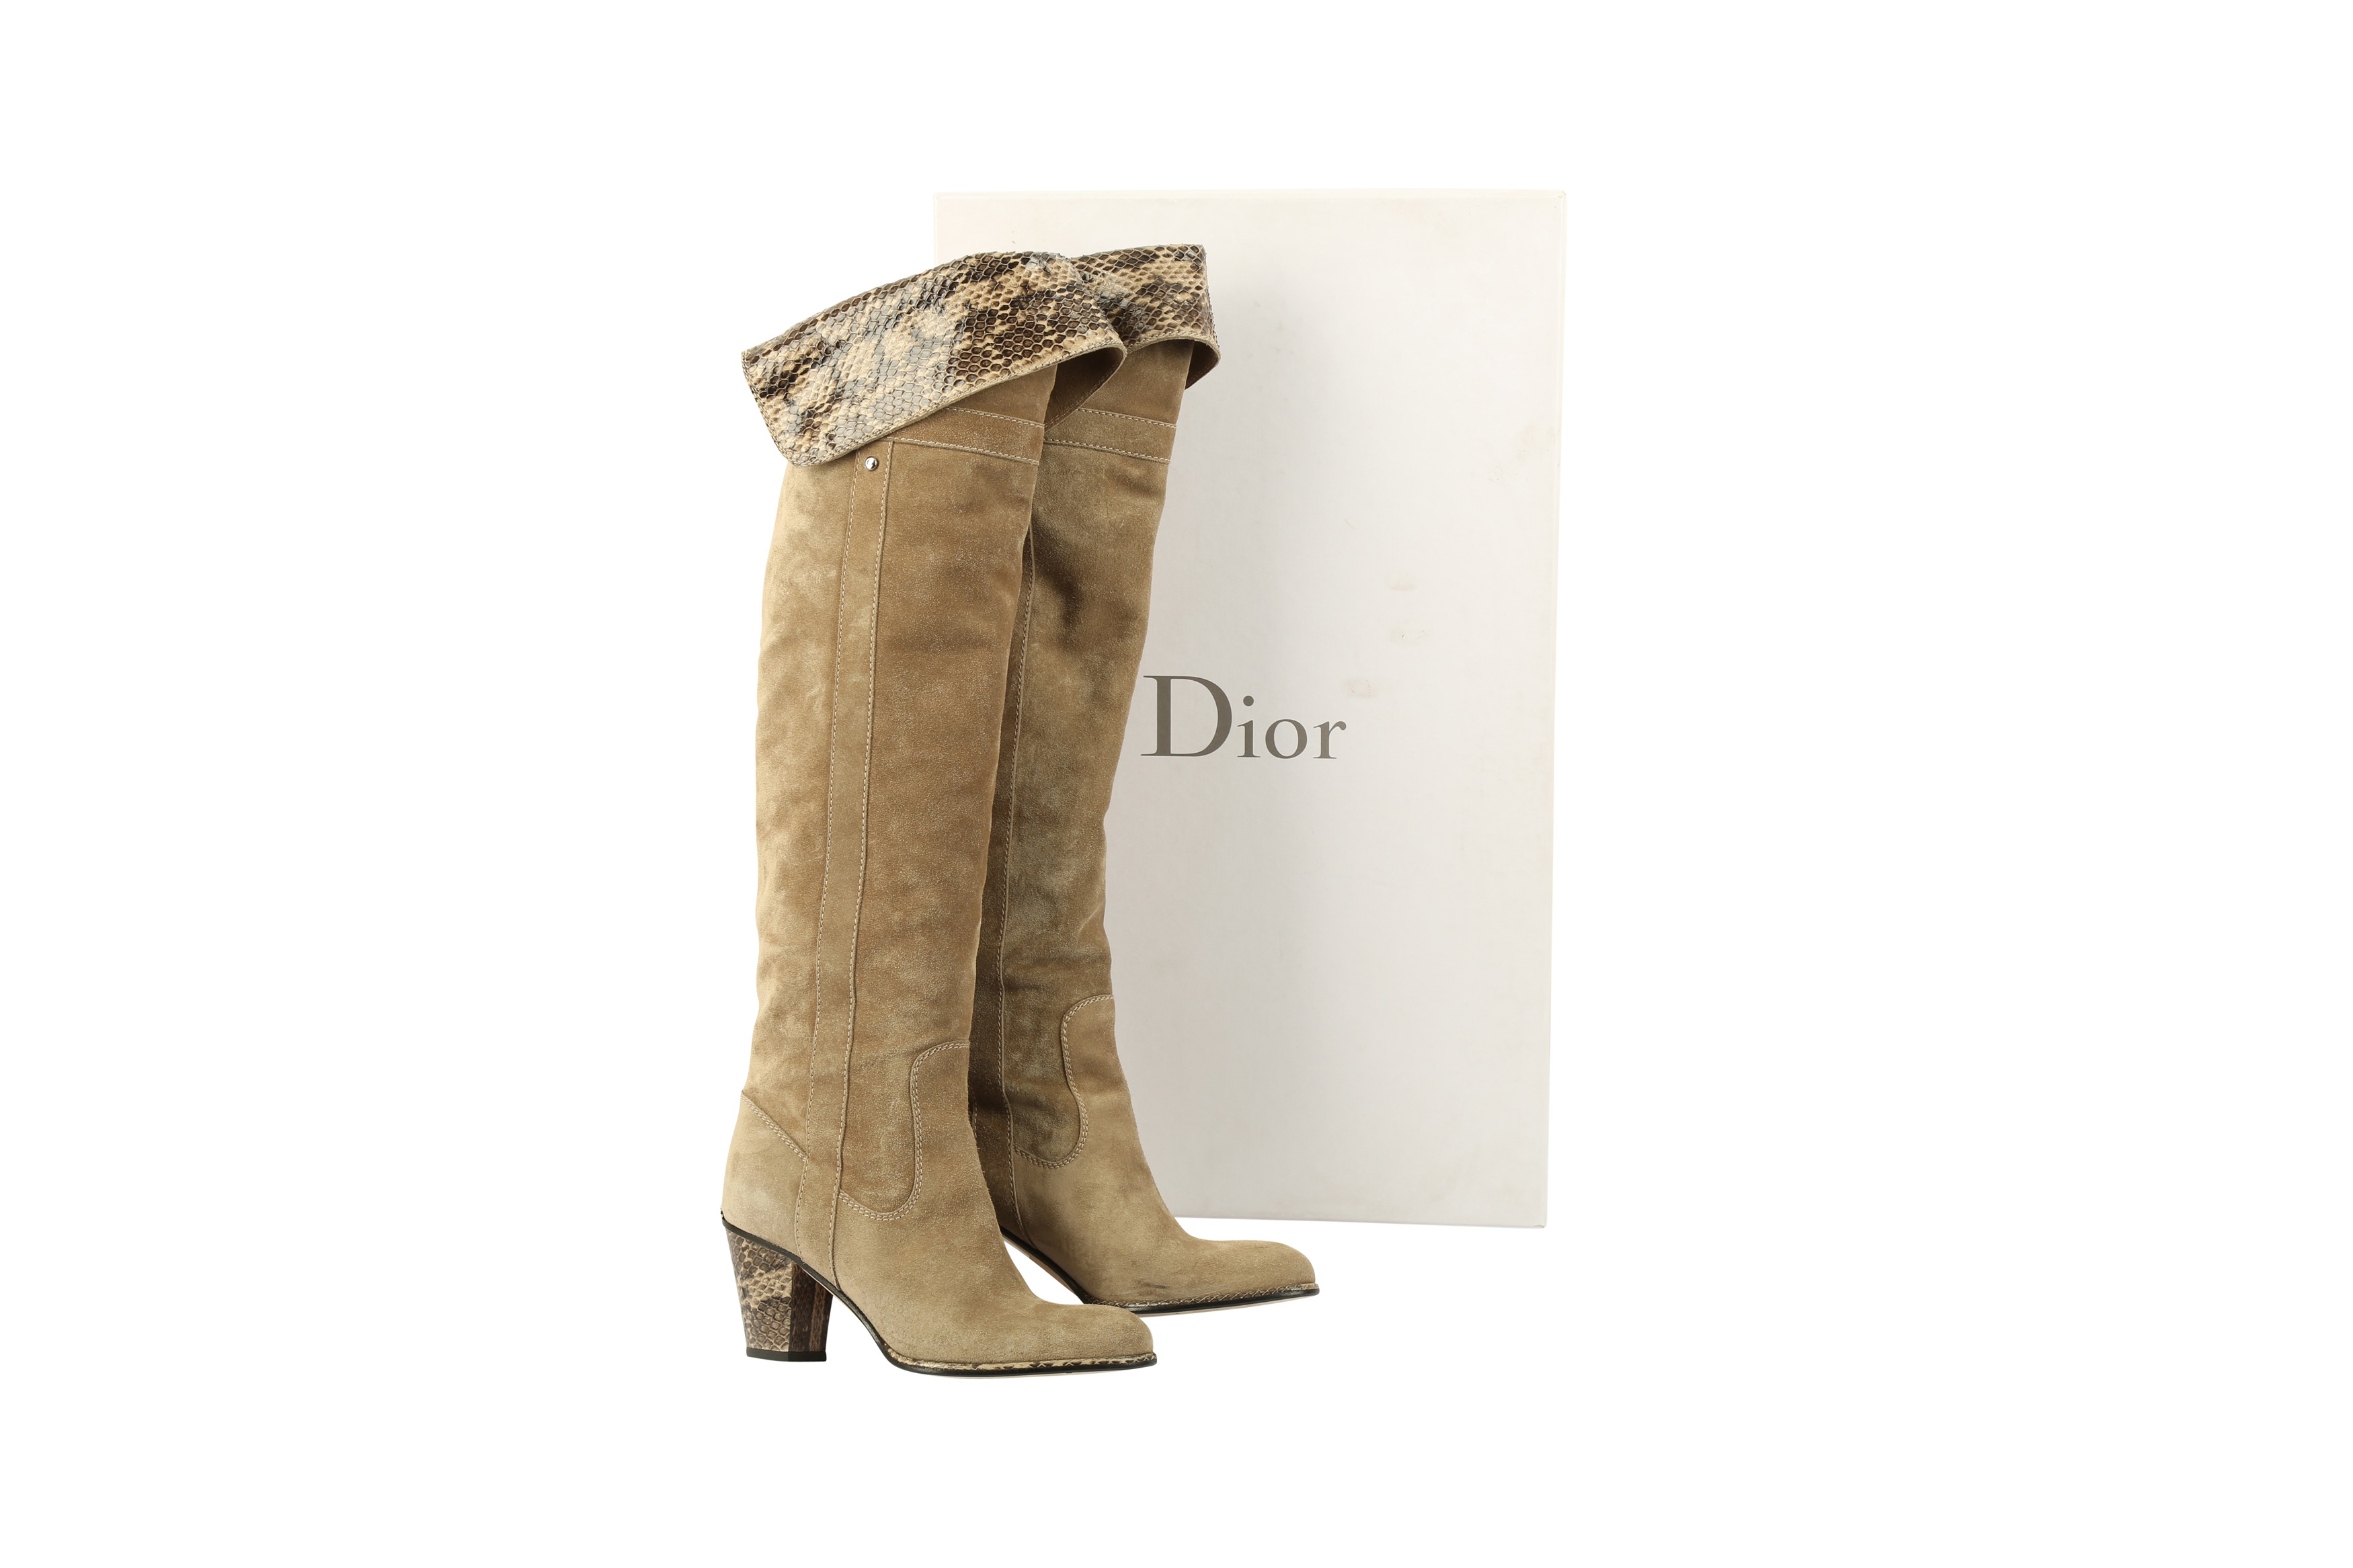 Dior Beige Cowboy Boots - Size 36.5 - Image 6 of 6